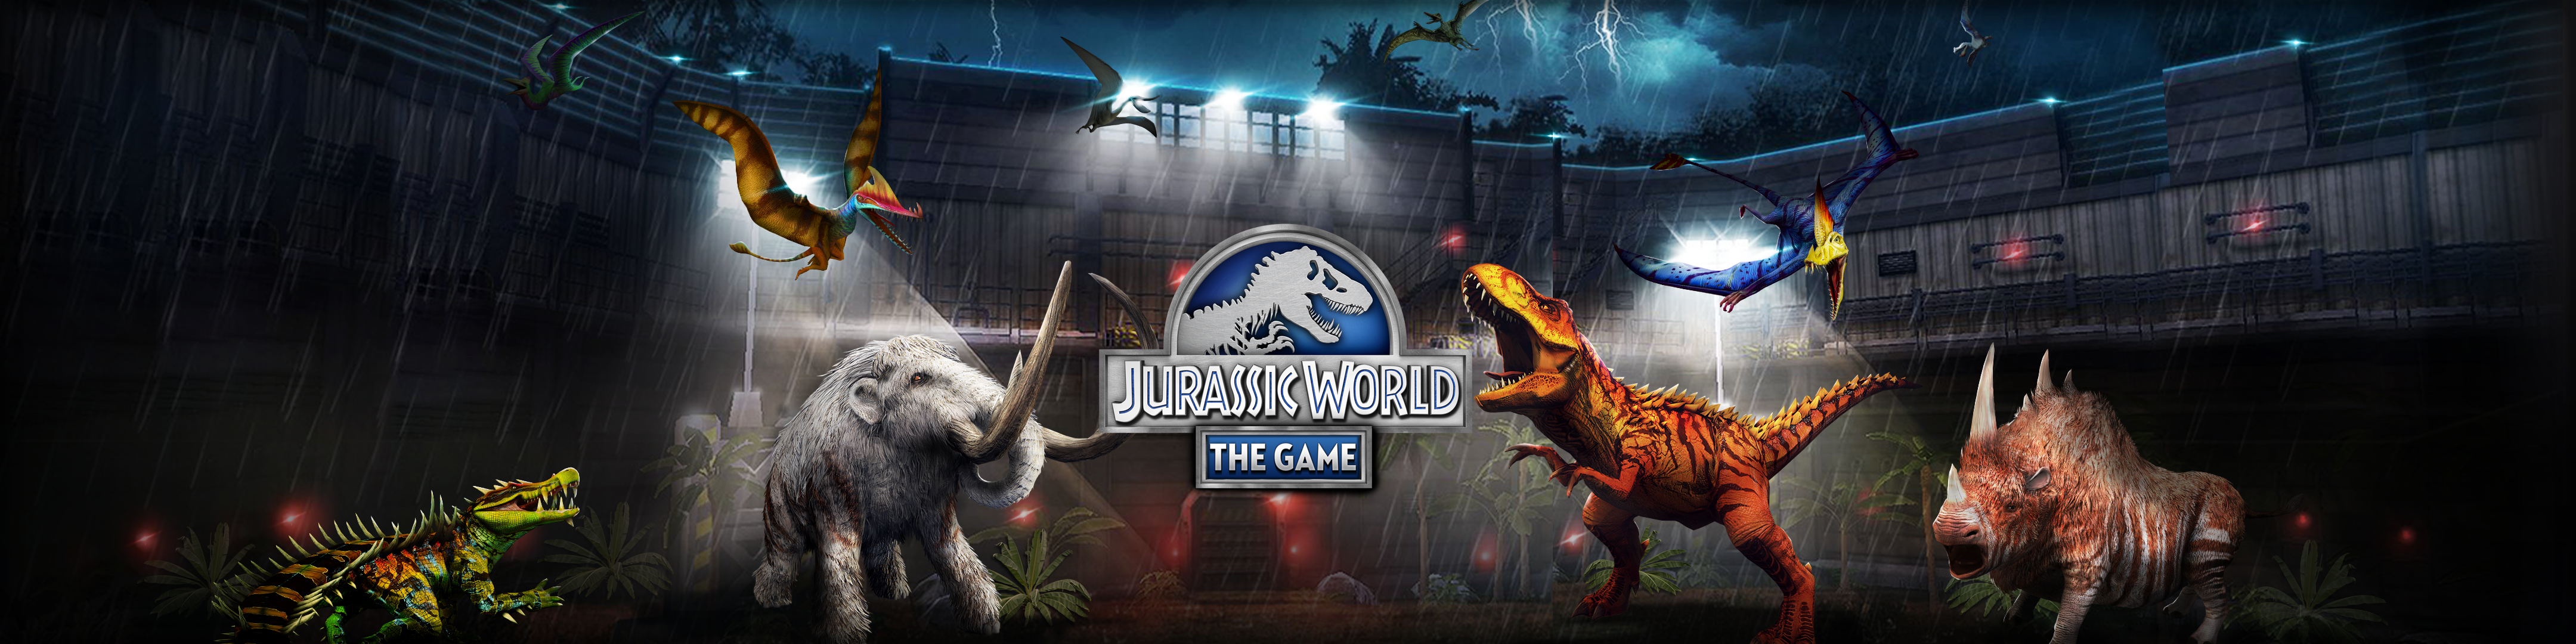 Jurassic World™: The Game - Overview - Apple App Store - US